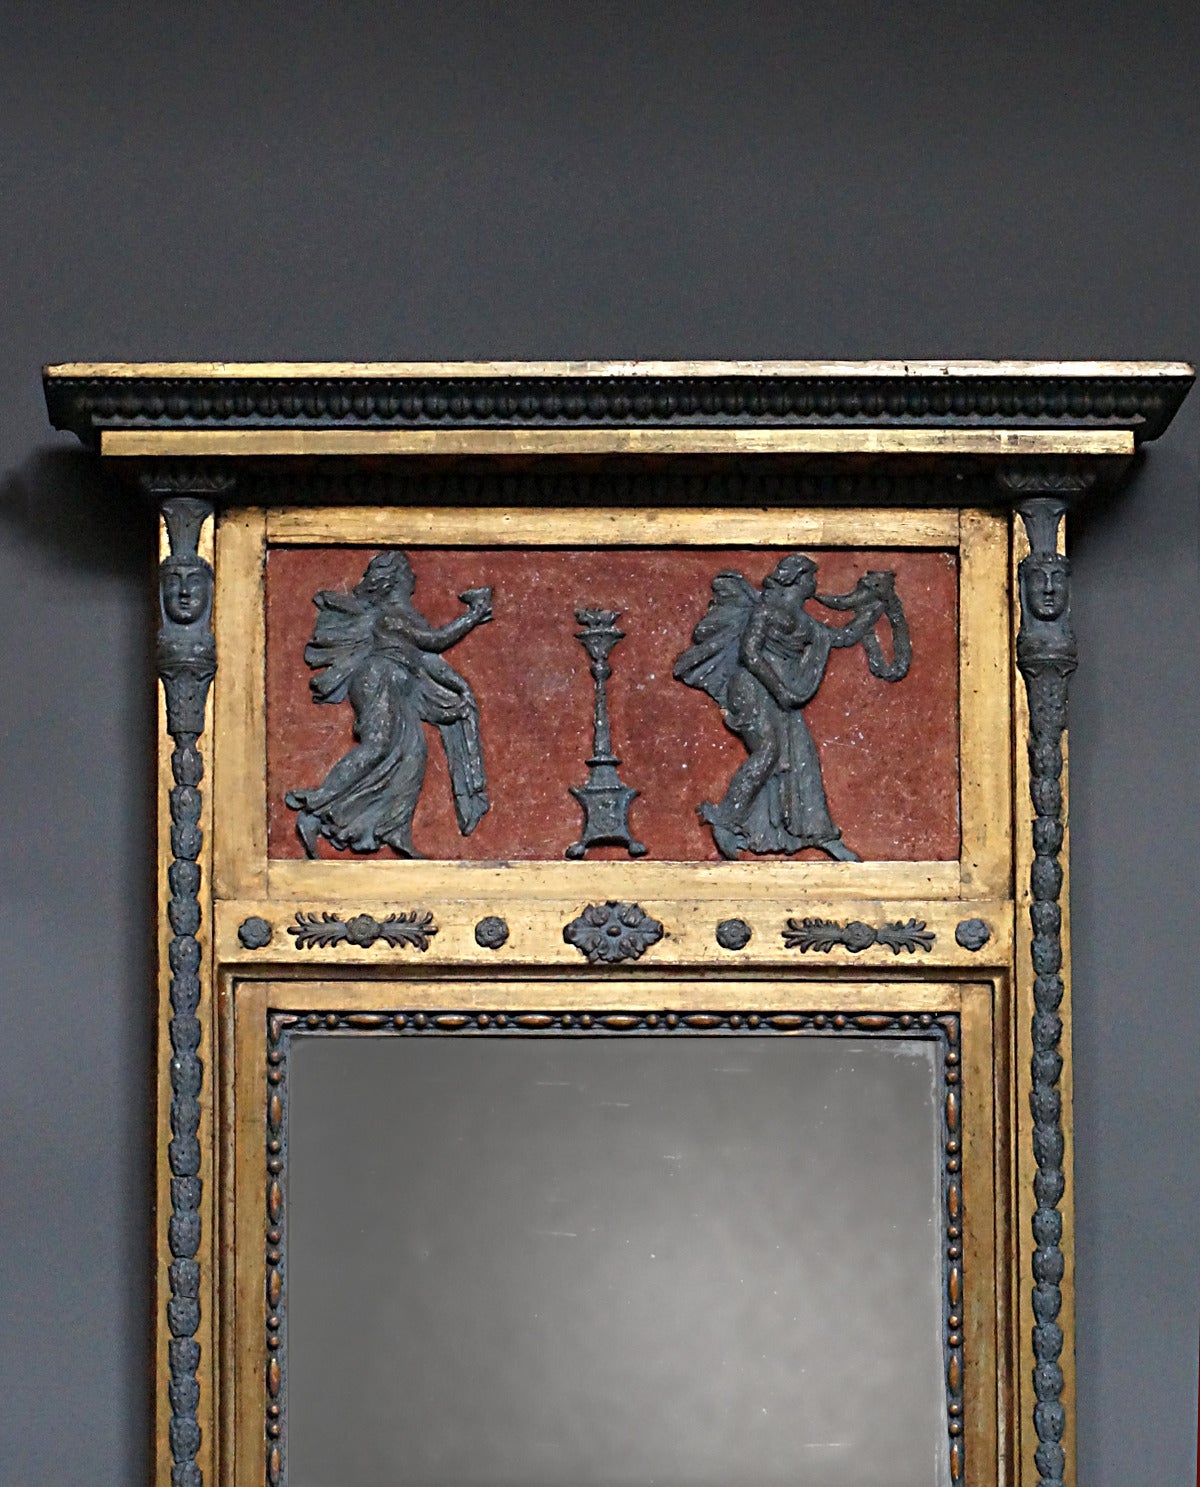 Period neoclassical mirror, Sweden, circa 1820, with original two-part mirror glass and back. The top frieze features two female figures in bas-relief bearing symbols of victory. Below the mirror is a panel with sphinxes. The entire frame is